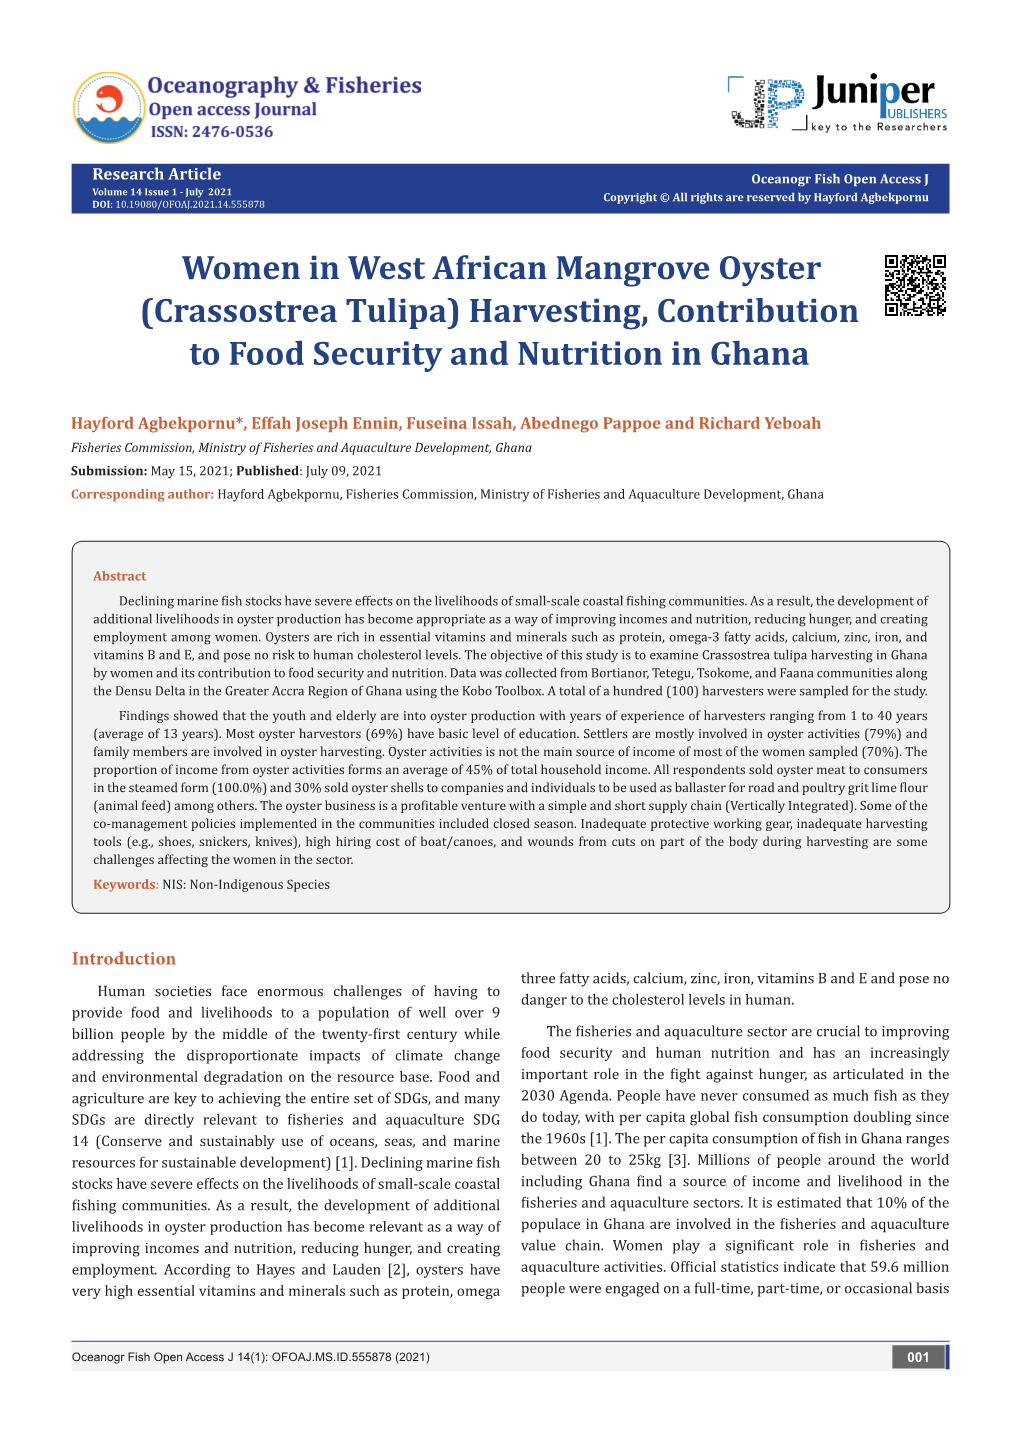 Women in West African Mangrove Oyster (Crassostrea Tulipa) Harvesting, Contribution to Food Security and Nutrition in Ghana